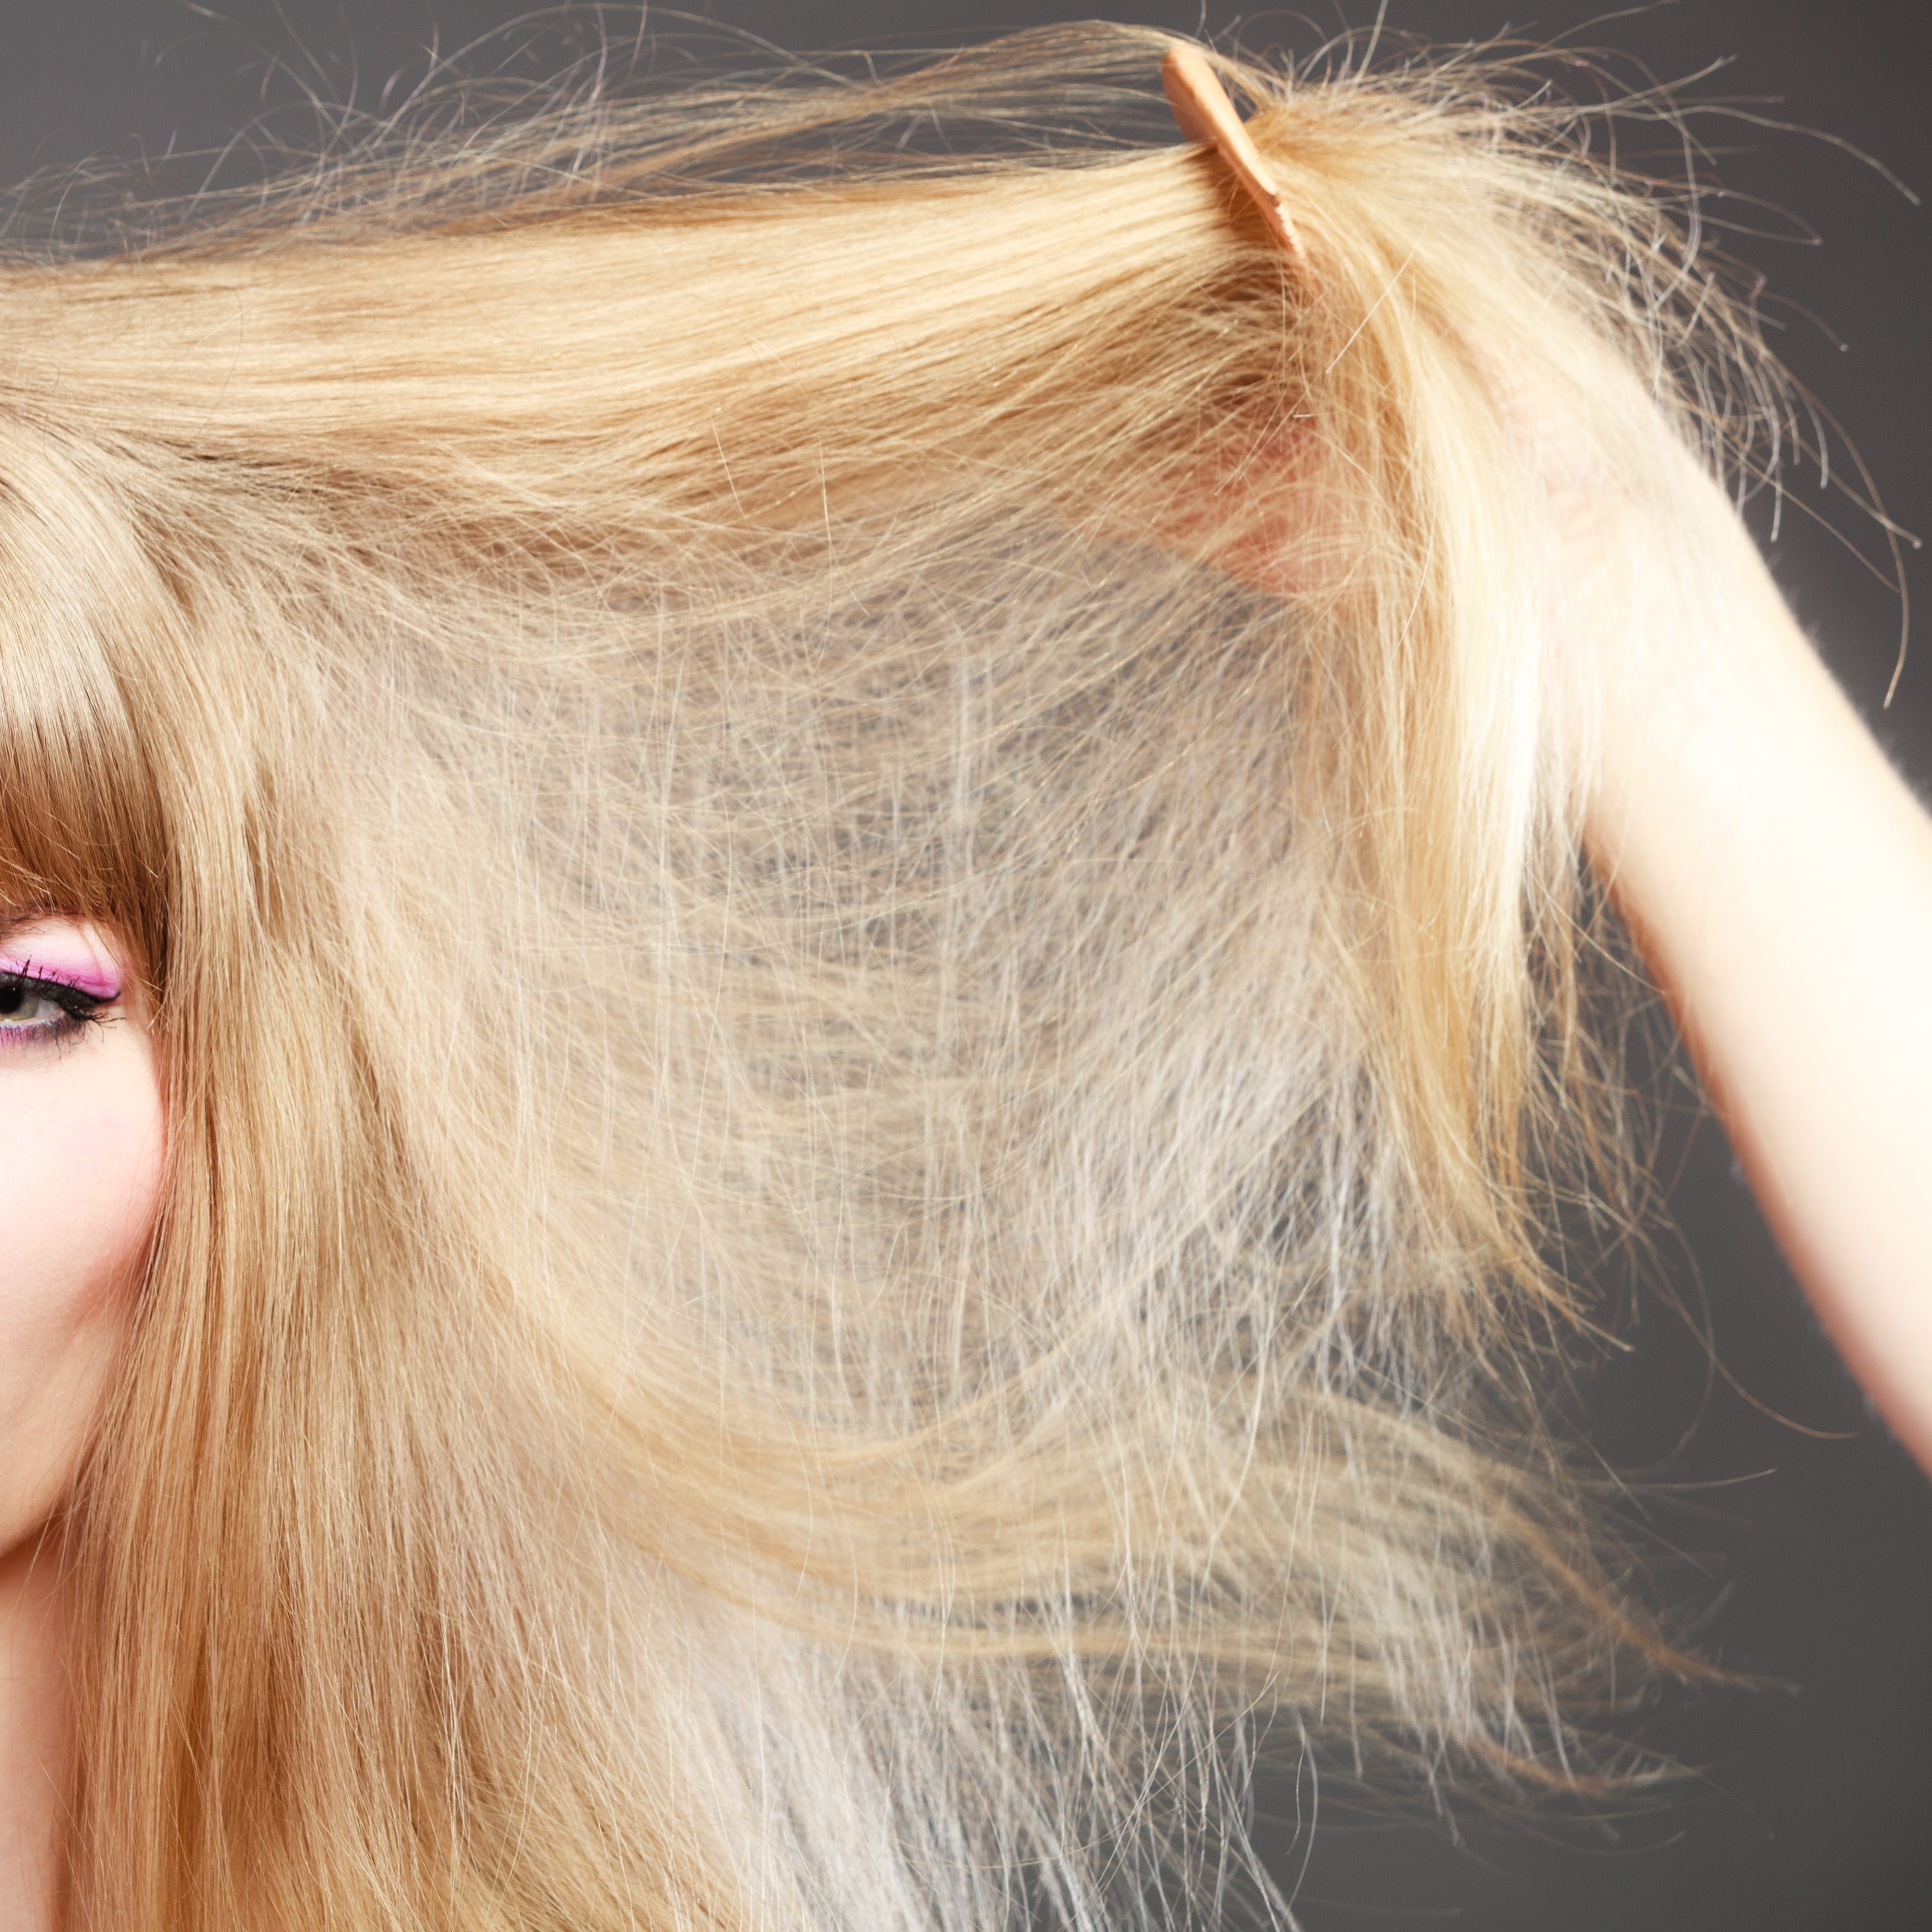 Can You Identify Moisturized Hair by Feeling it? - Check That Hair Fact!